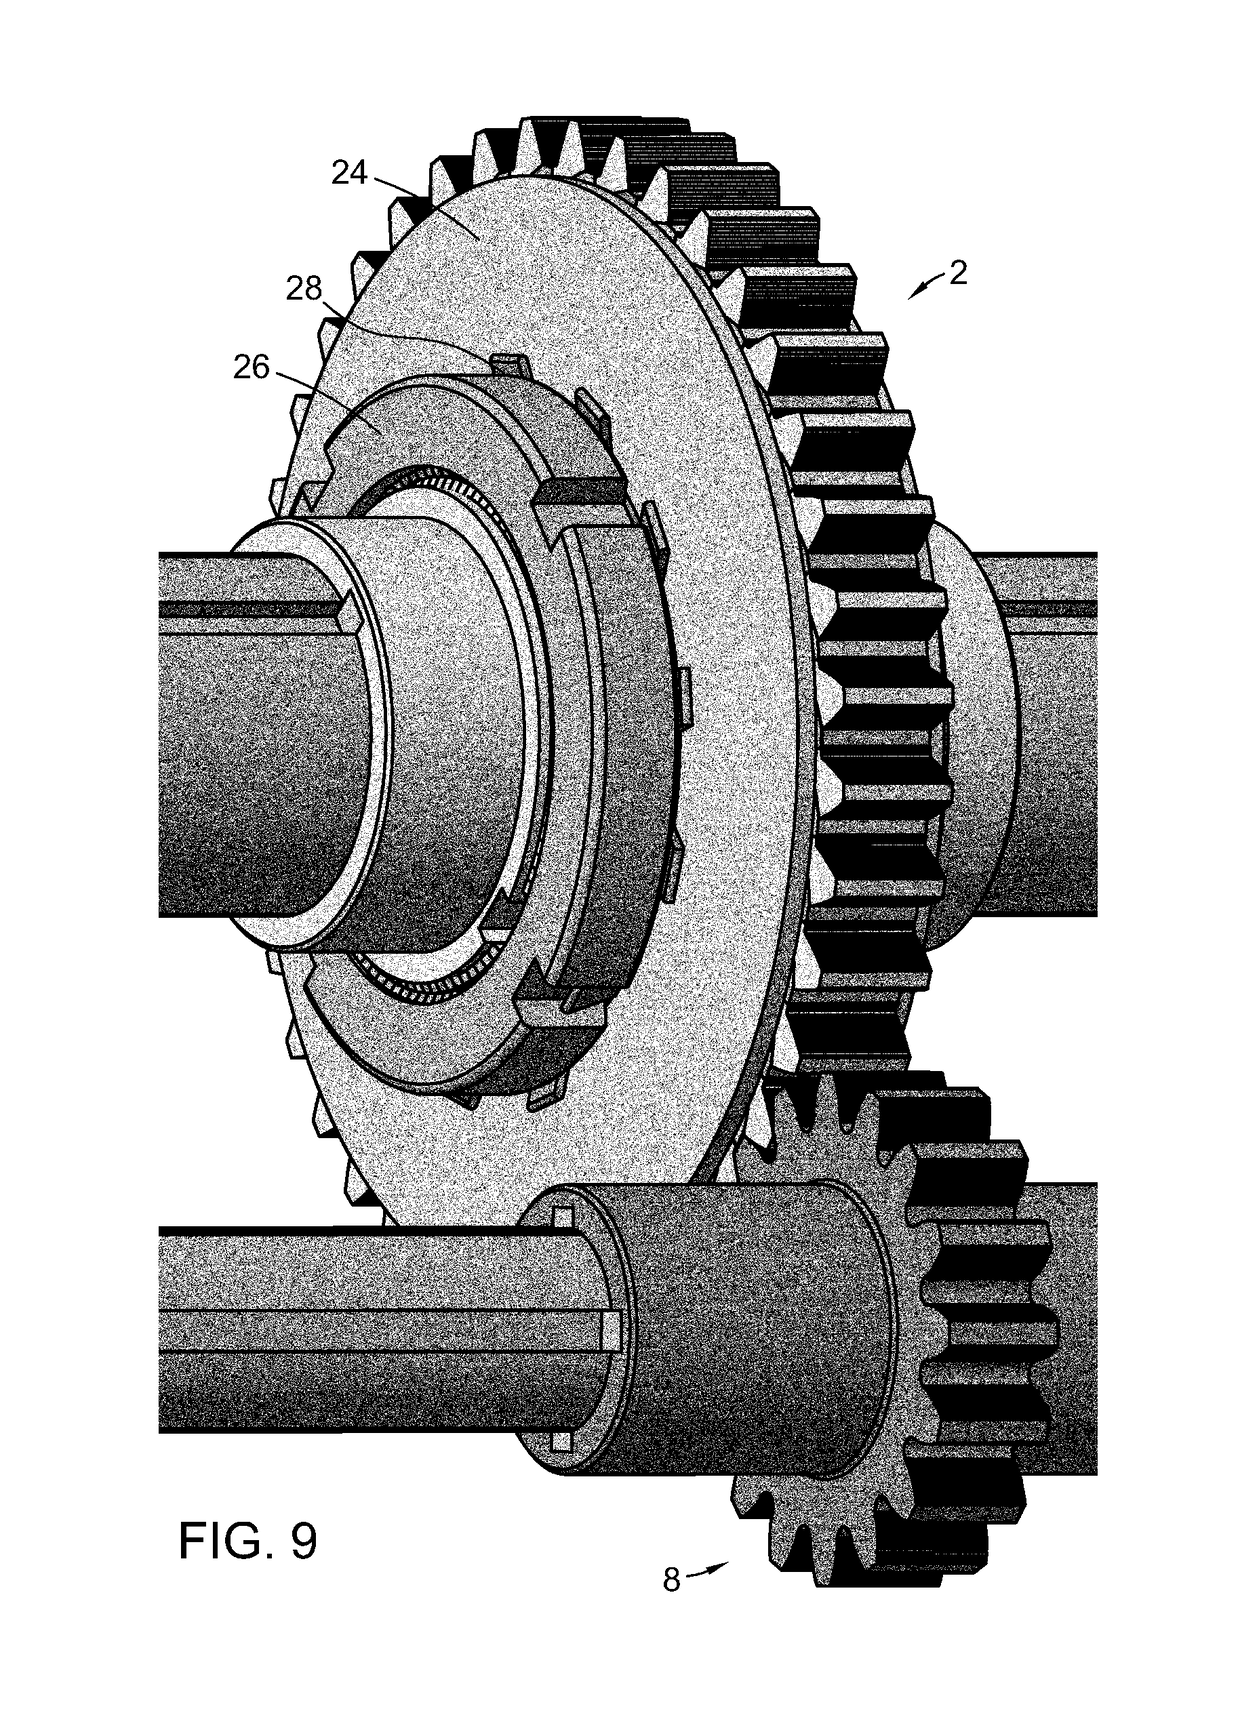 Torque-handling gear with teeth mounted on flexible arms